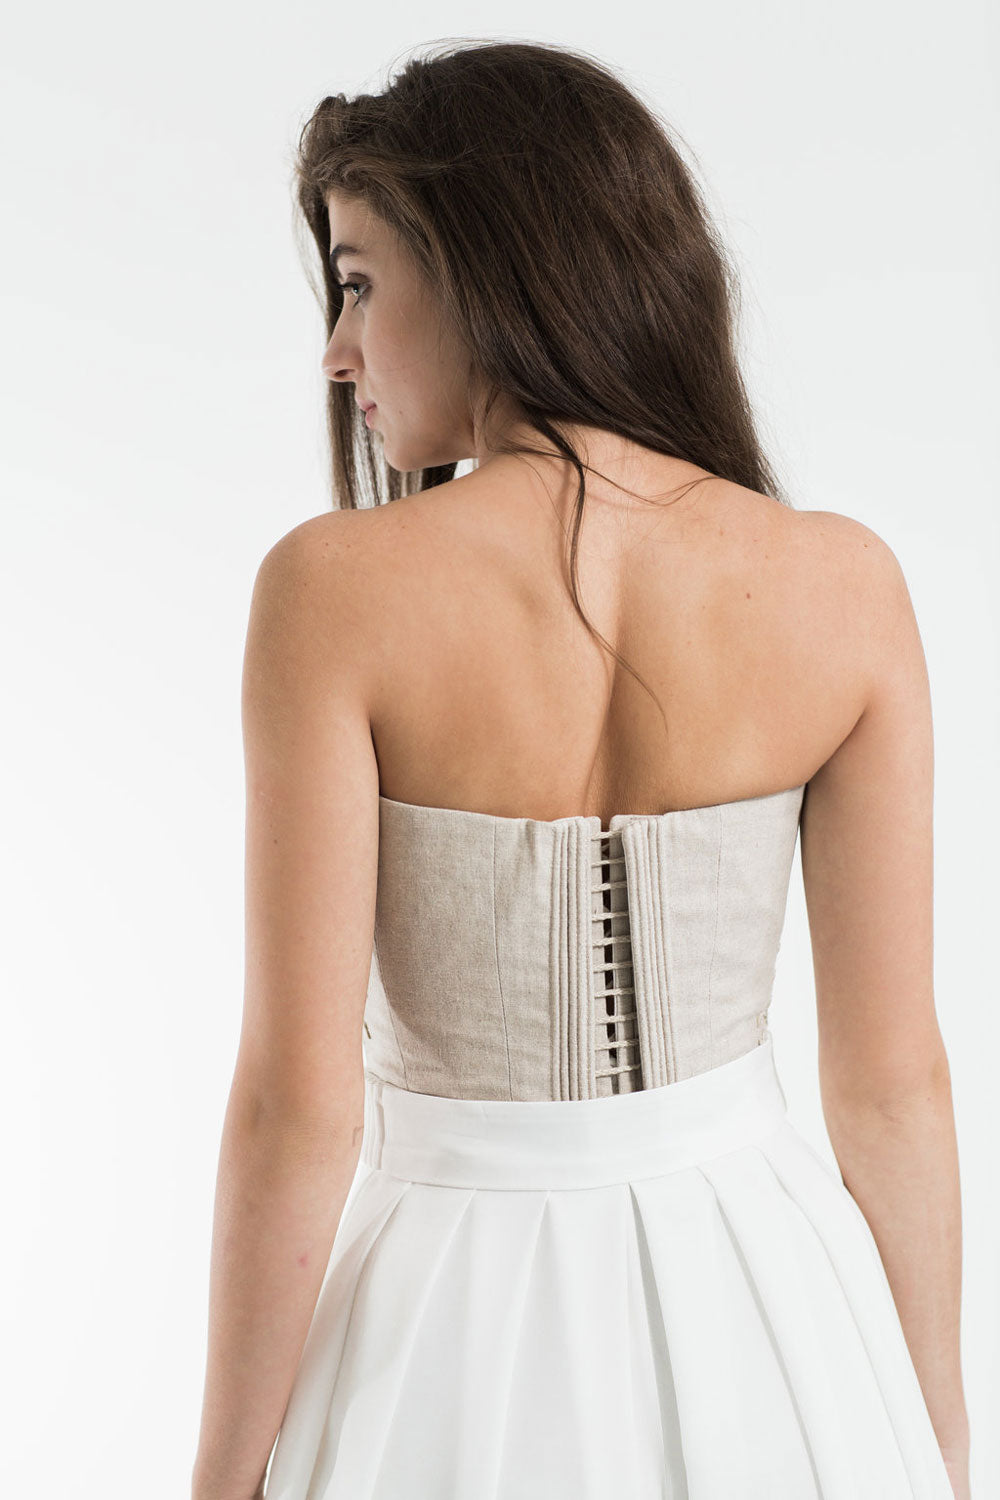 Black Cotton Sateen Corset With White Flossing & Woven Trim by P. N.